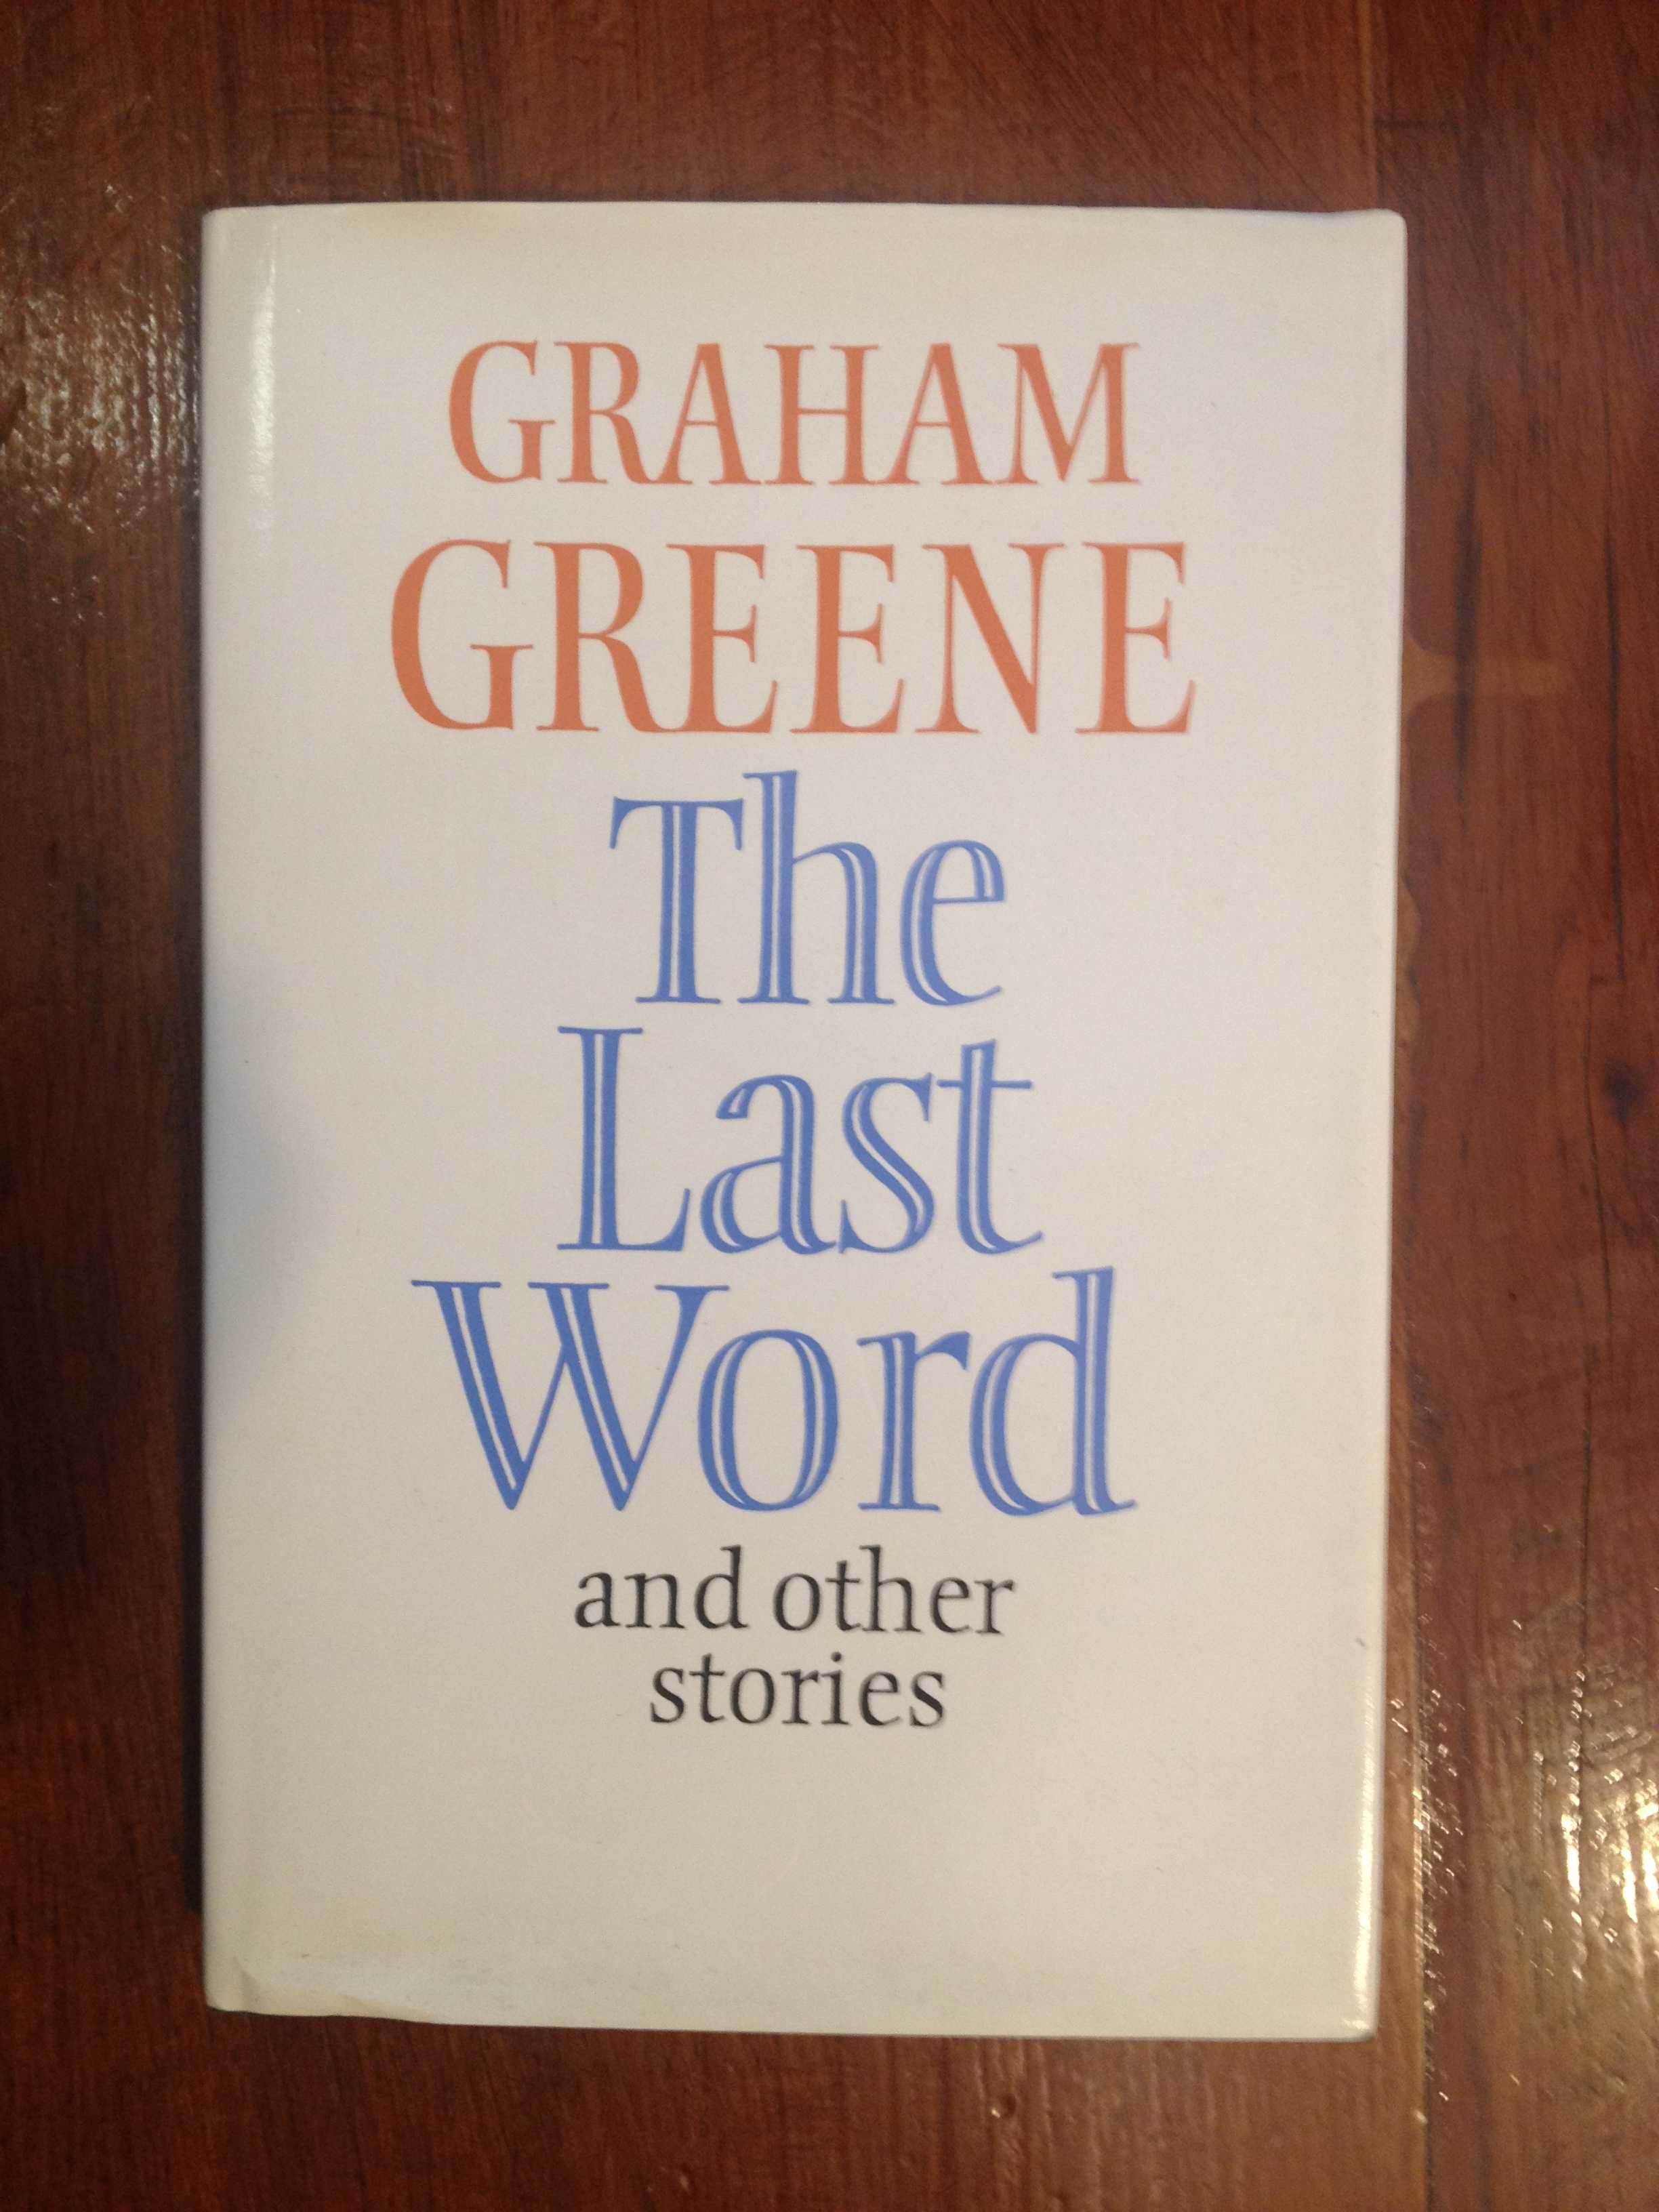 Graham Greene - The last word and other stories